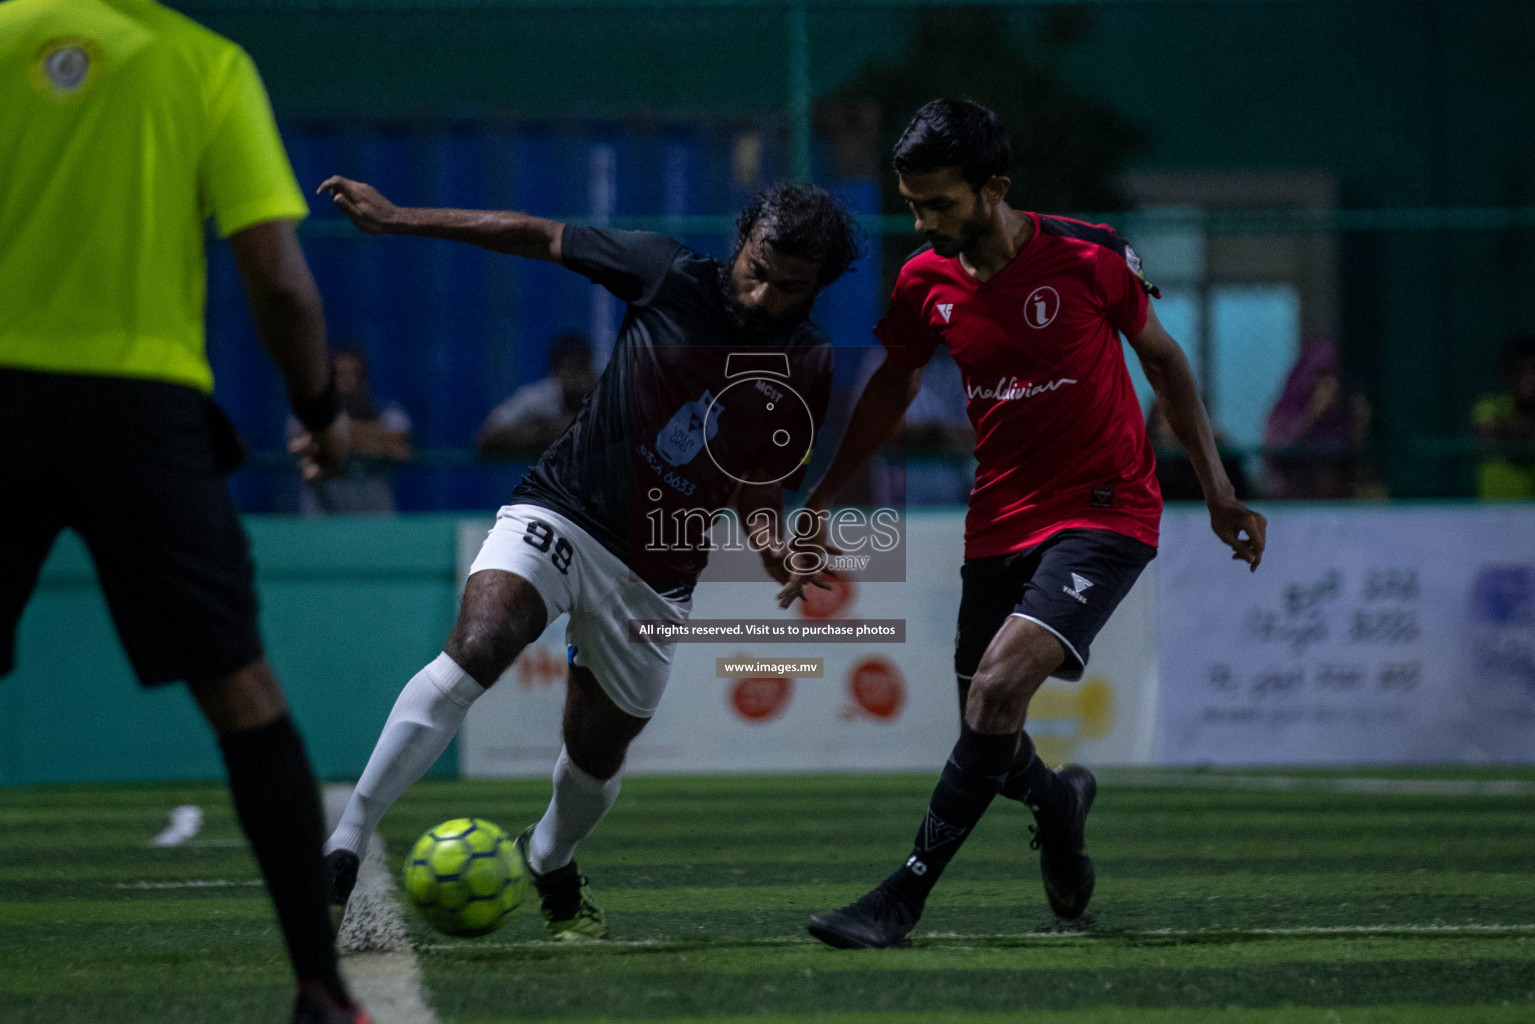 Club Maldives Day 12 in Hulhumale, Male', Maldives on 22nd April 2019 Photos:  Ismail thoriq /images.mv